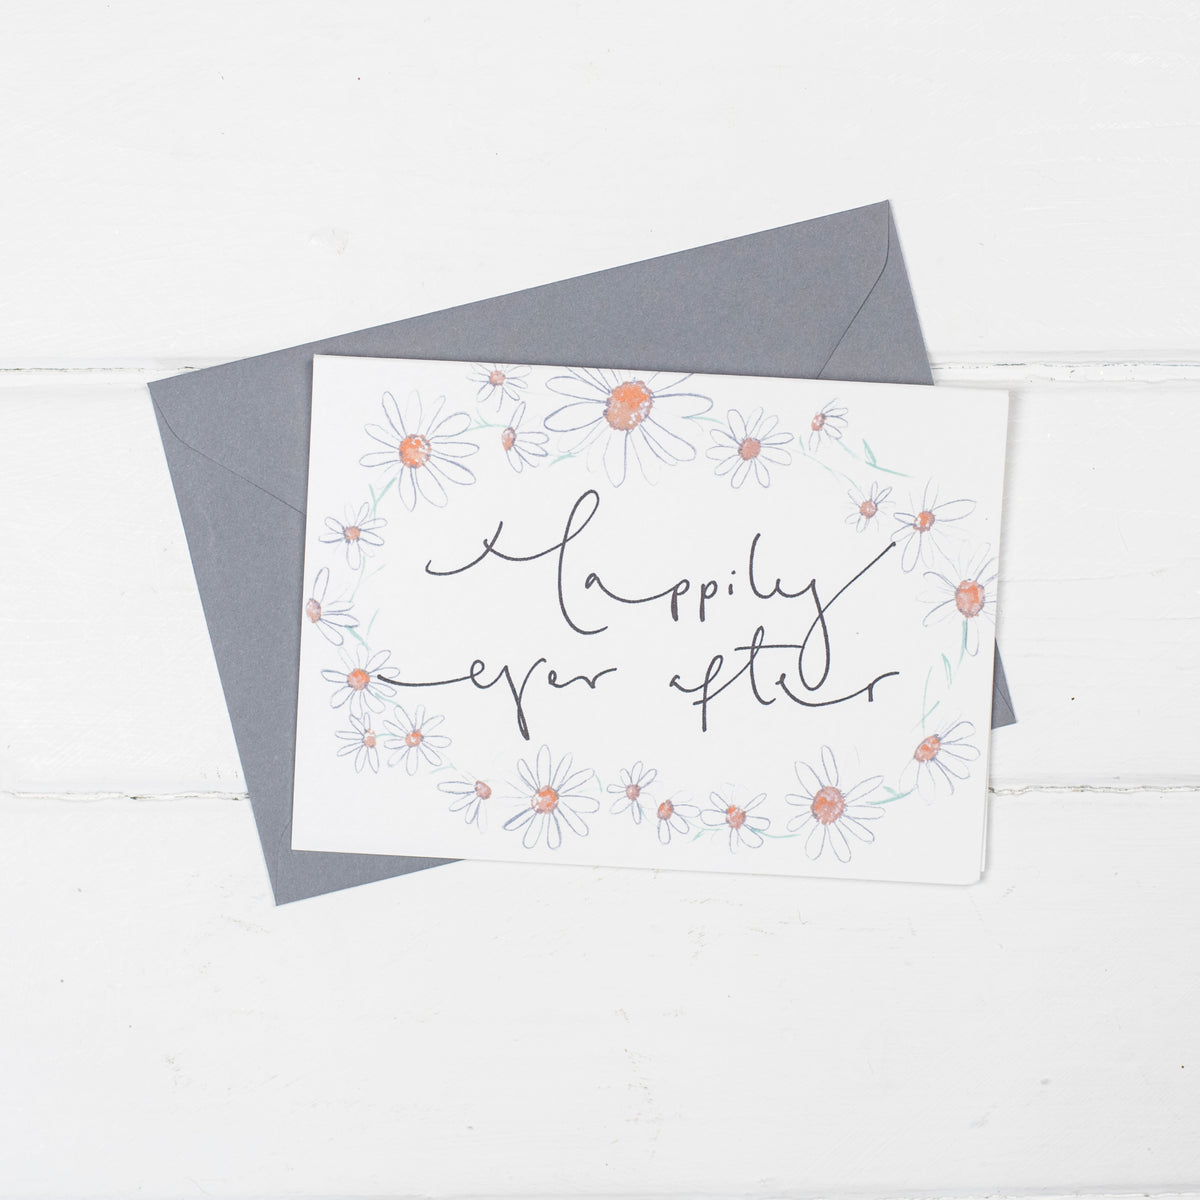 'Happily Ever After' Daisy Chain Card